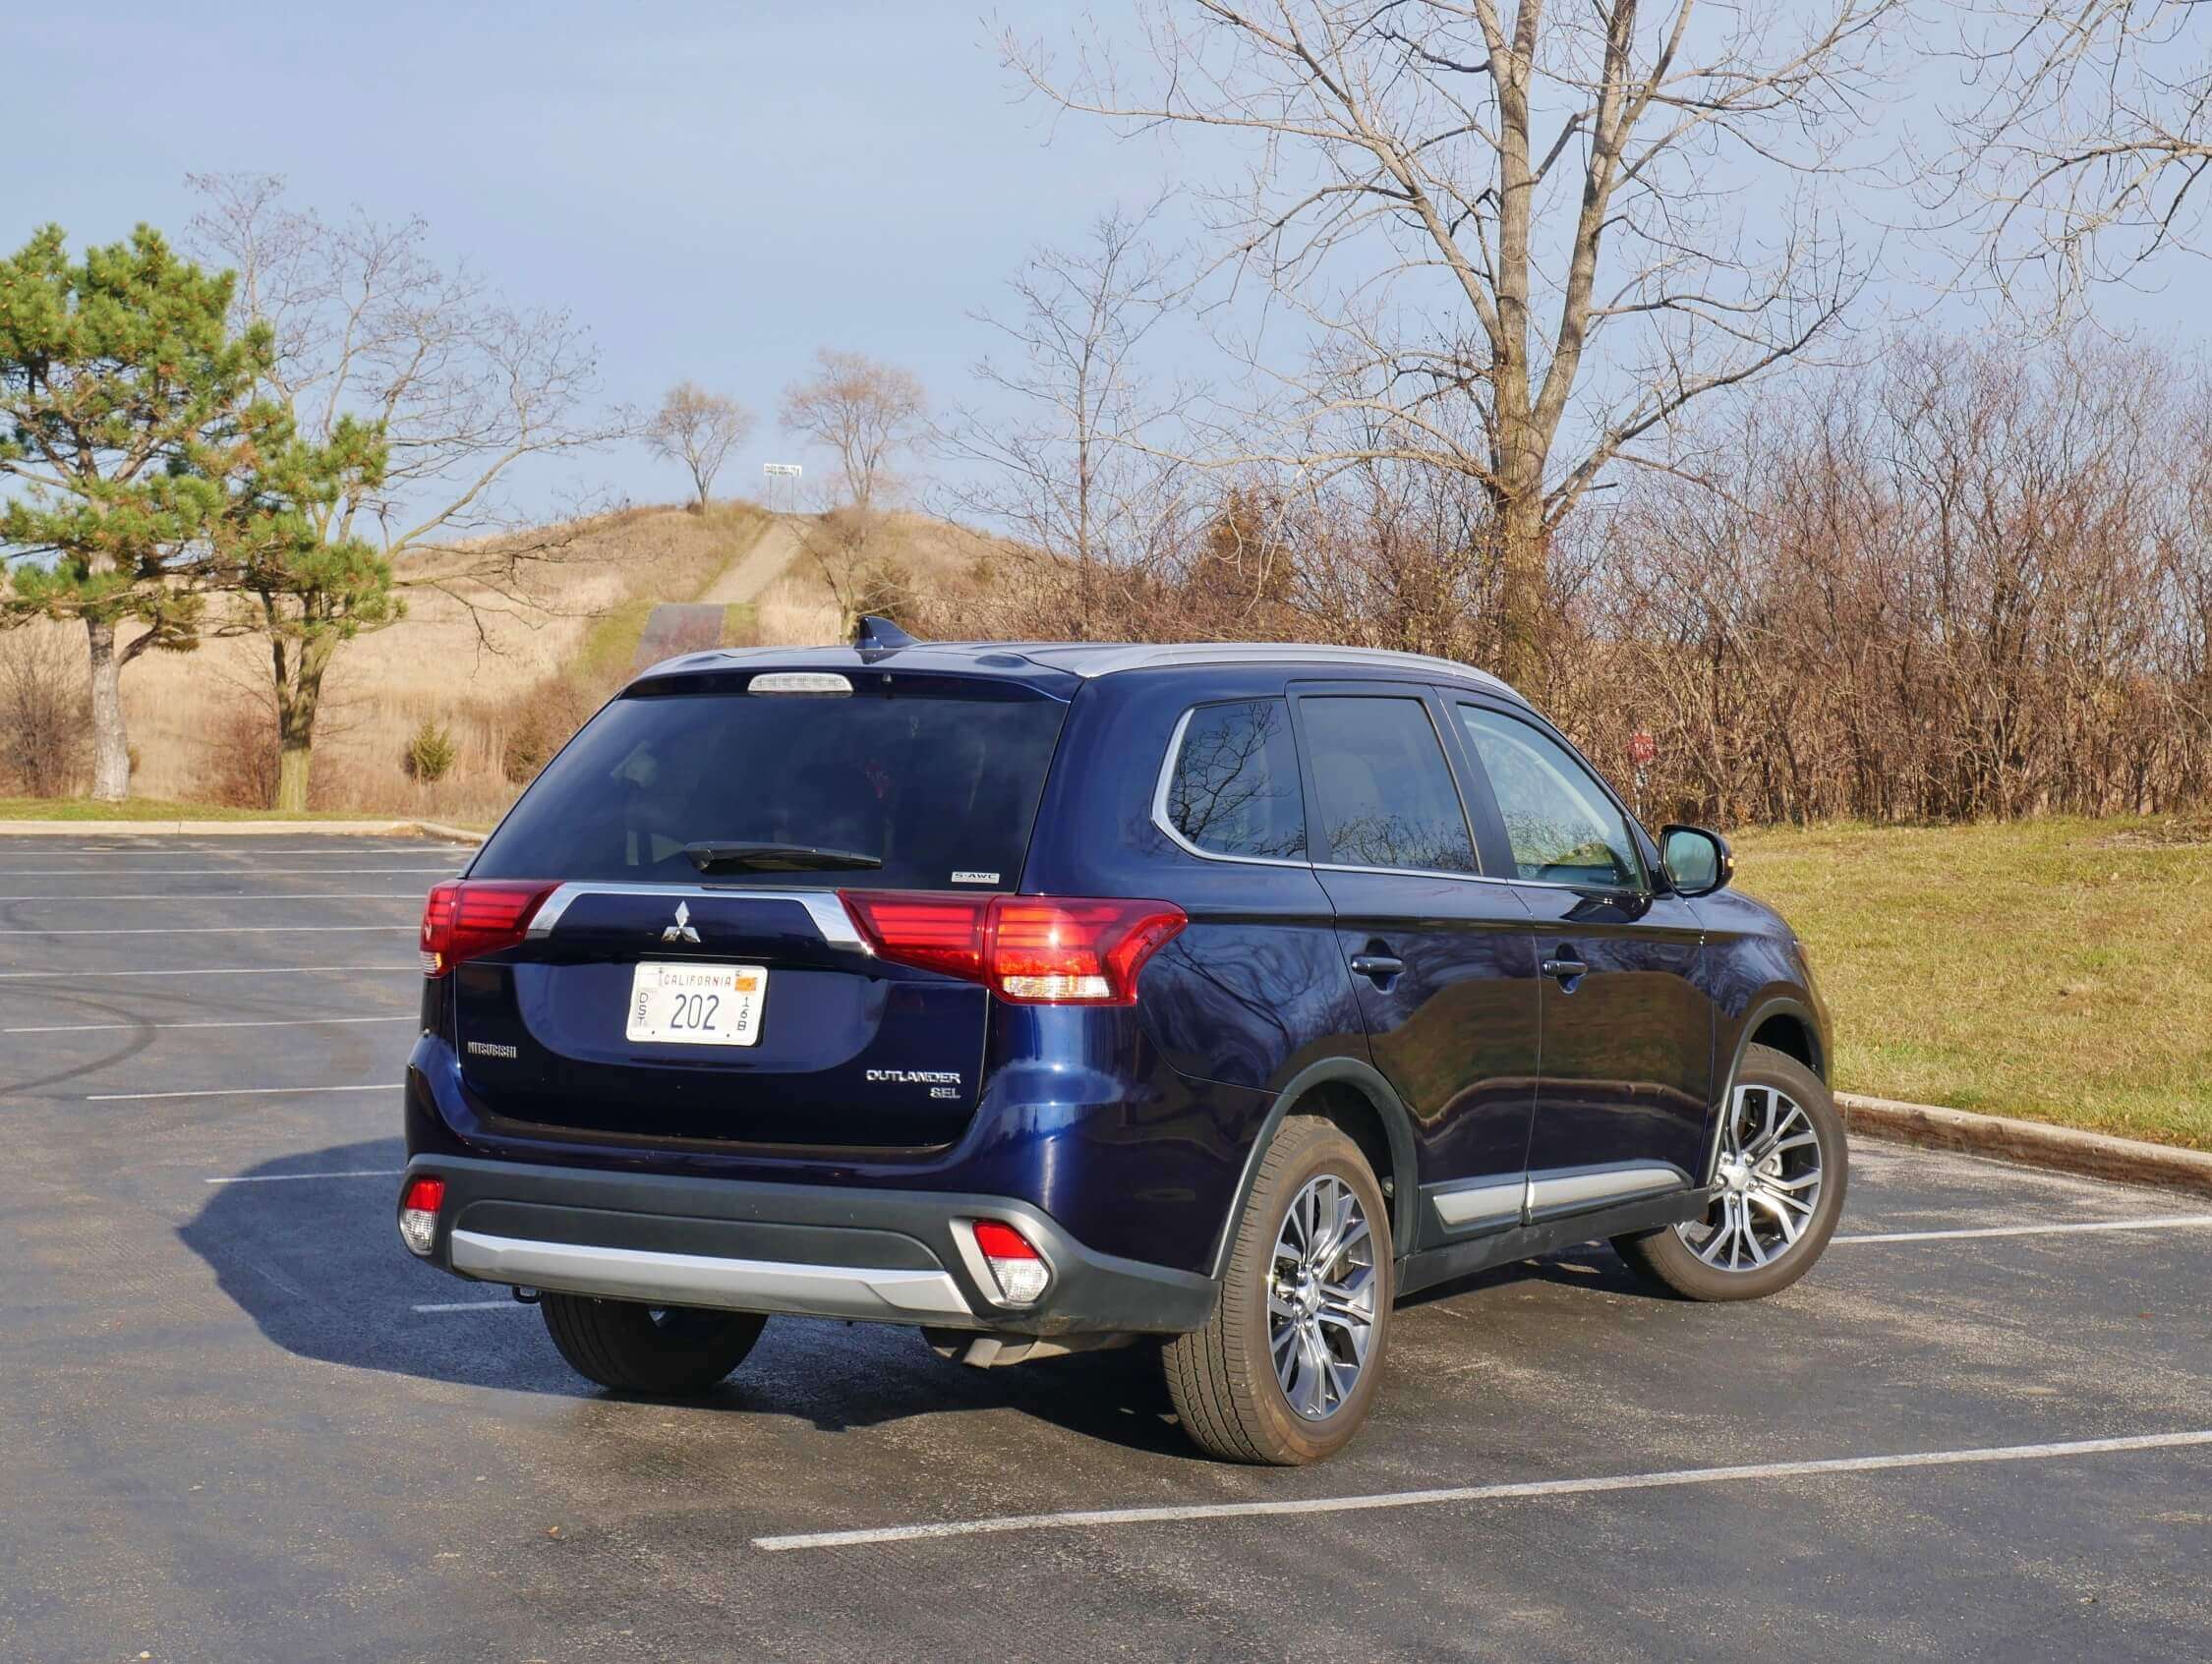 2018 Mitsubishi Outlander 2.4 SEL AWC: Std. 18" alloy wheels, plenty of chrome, simulated skid plates and wrap-around boomerang LED light assemblies keep things interesting looking